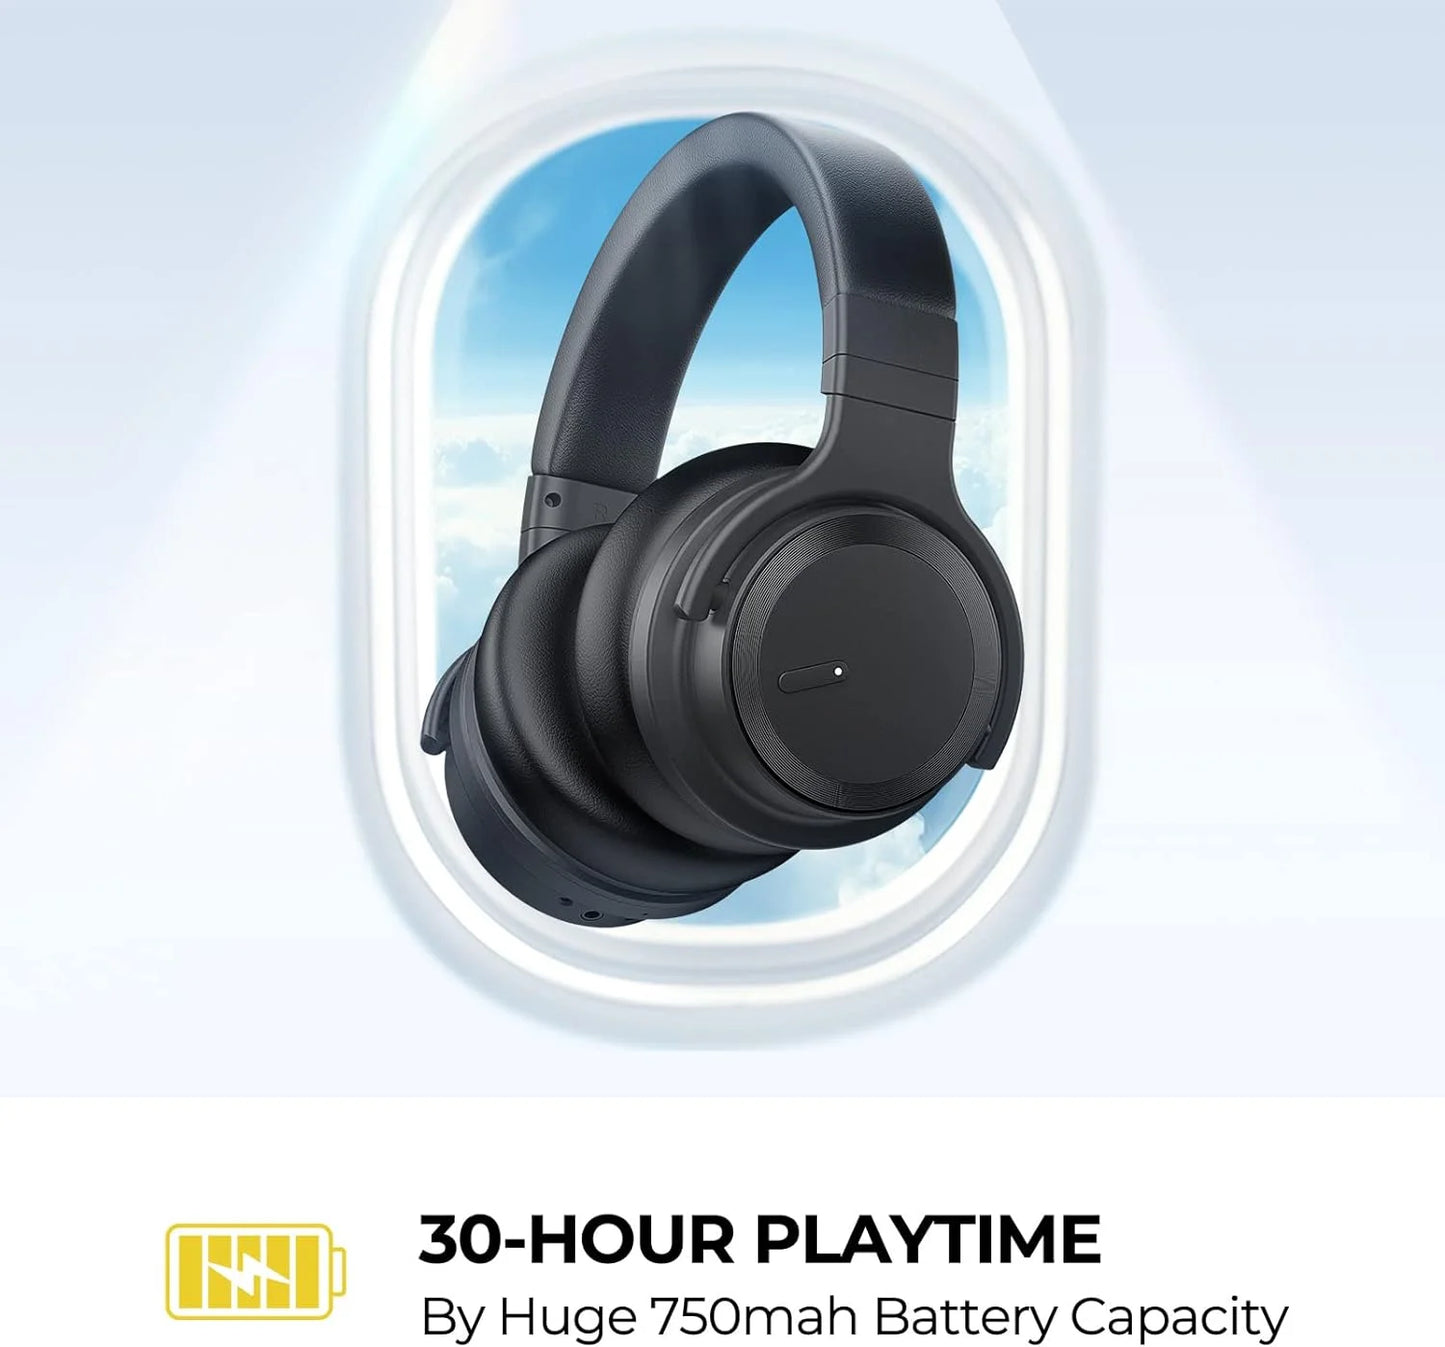 E7 Active Noise Cancelling Headphones Wireless Bluetooth Headphones with Rich Bass, Wireless Headphones with Clear Calls, Black